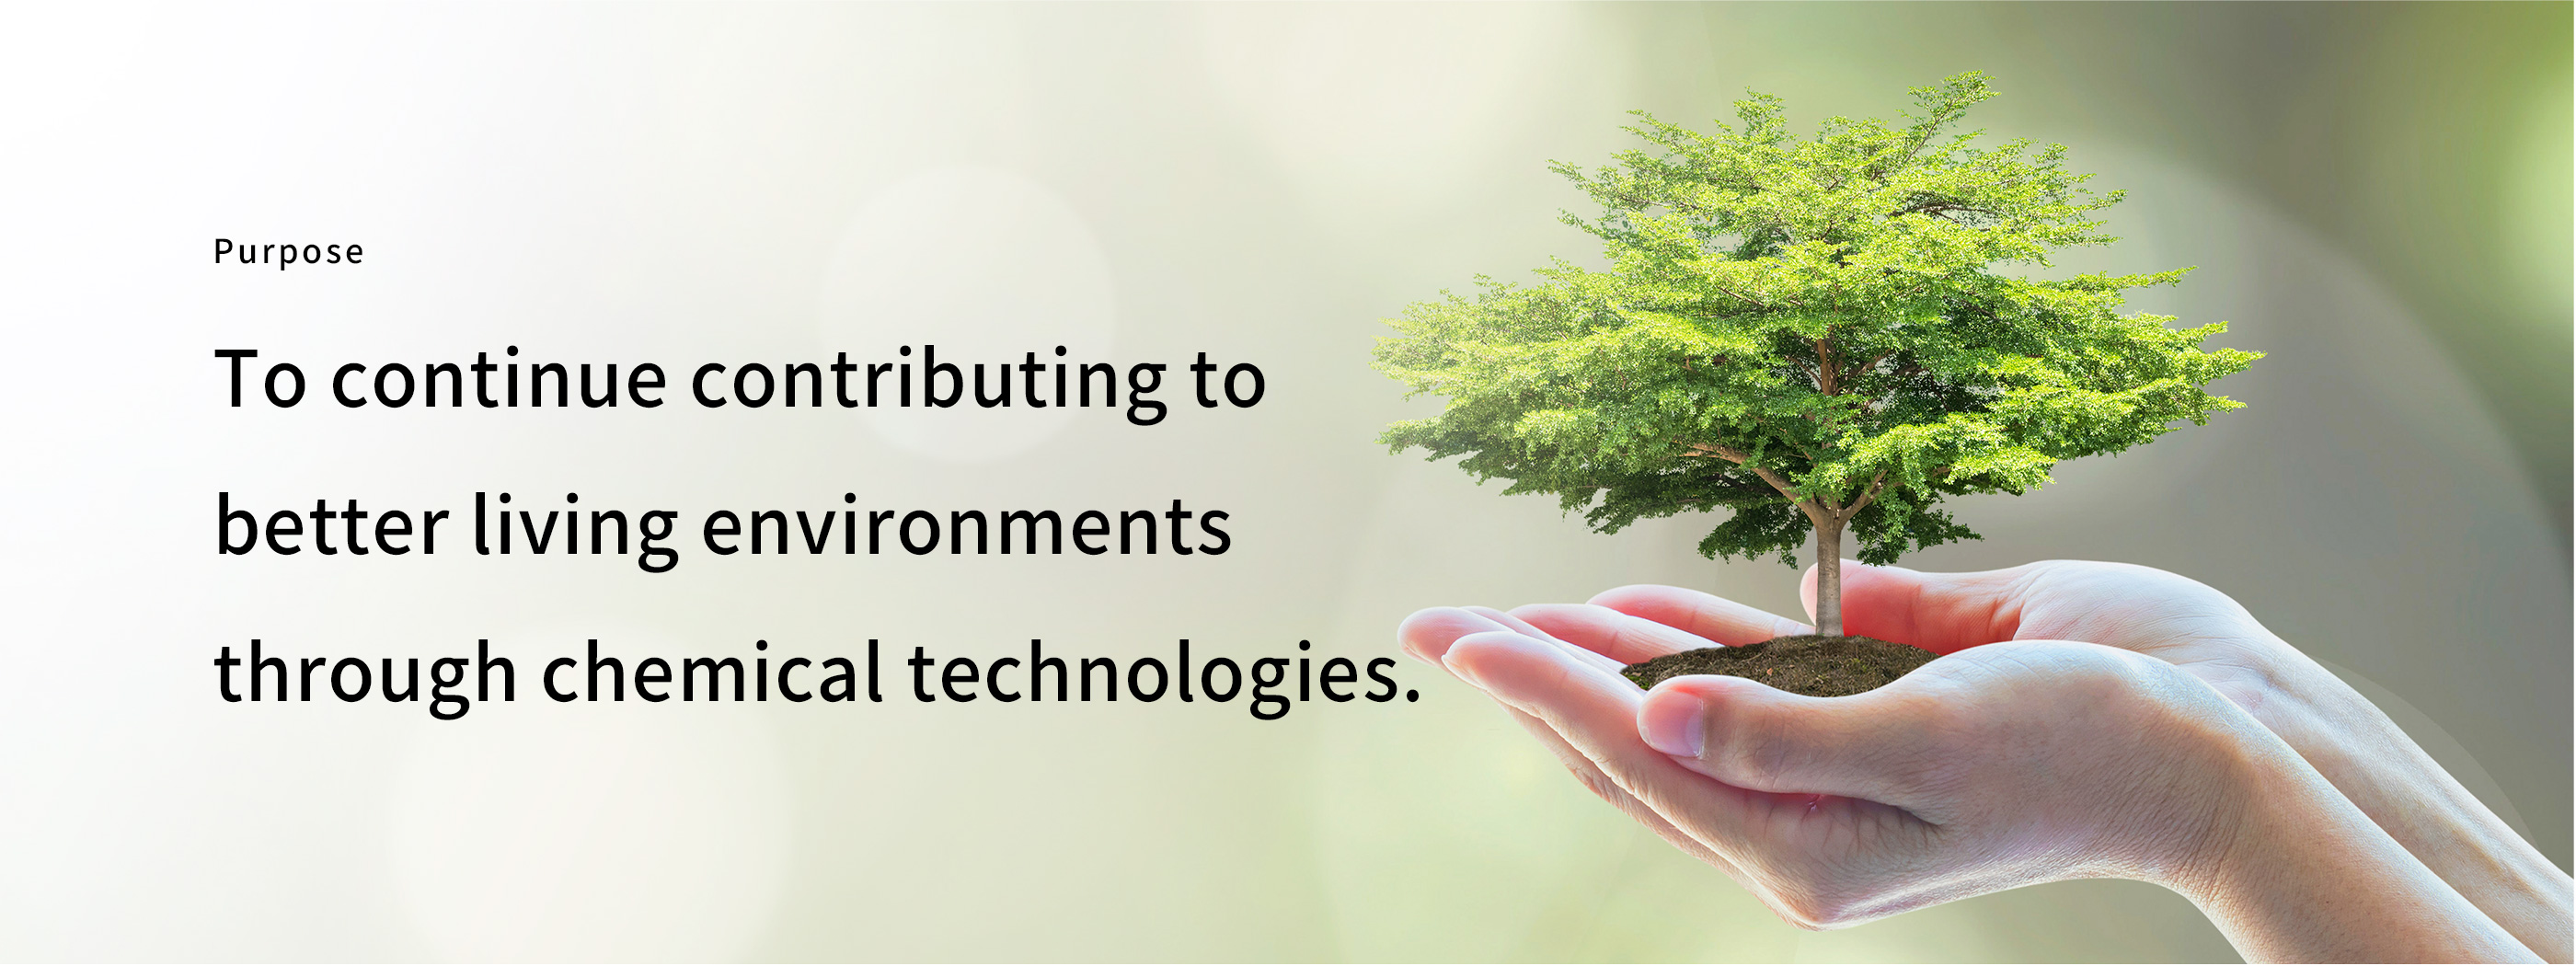 To continue contributing to better living environments through chemical technologies.